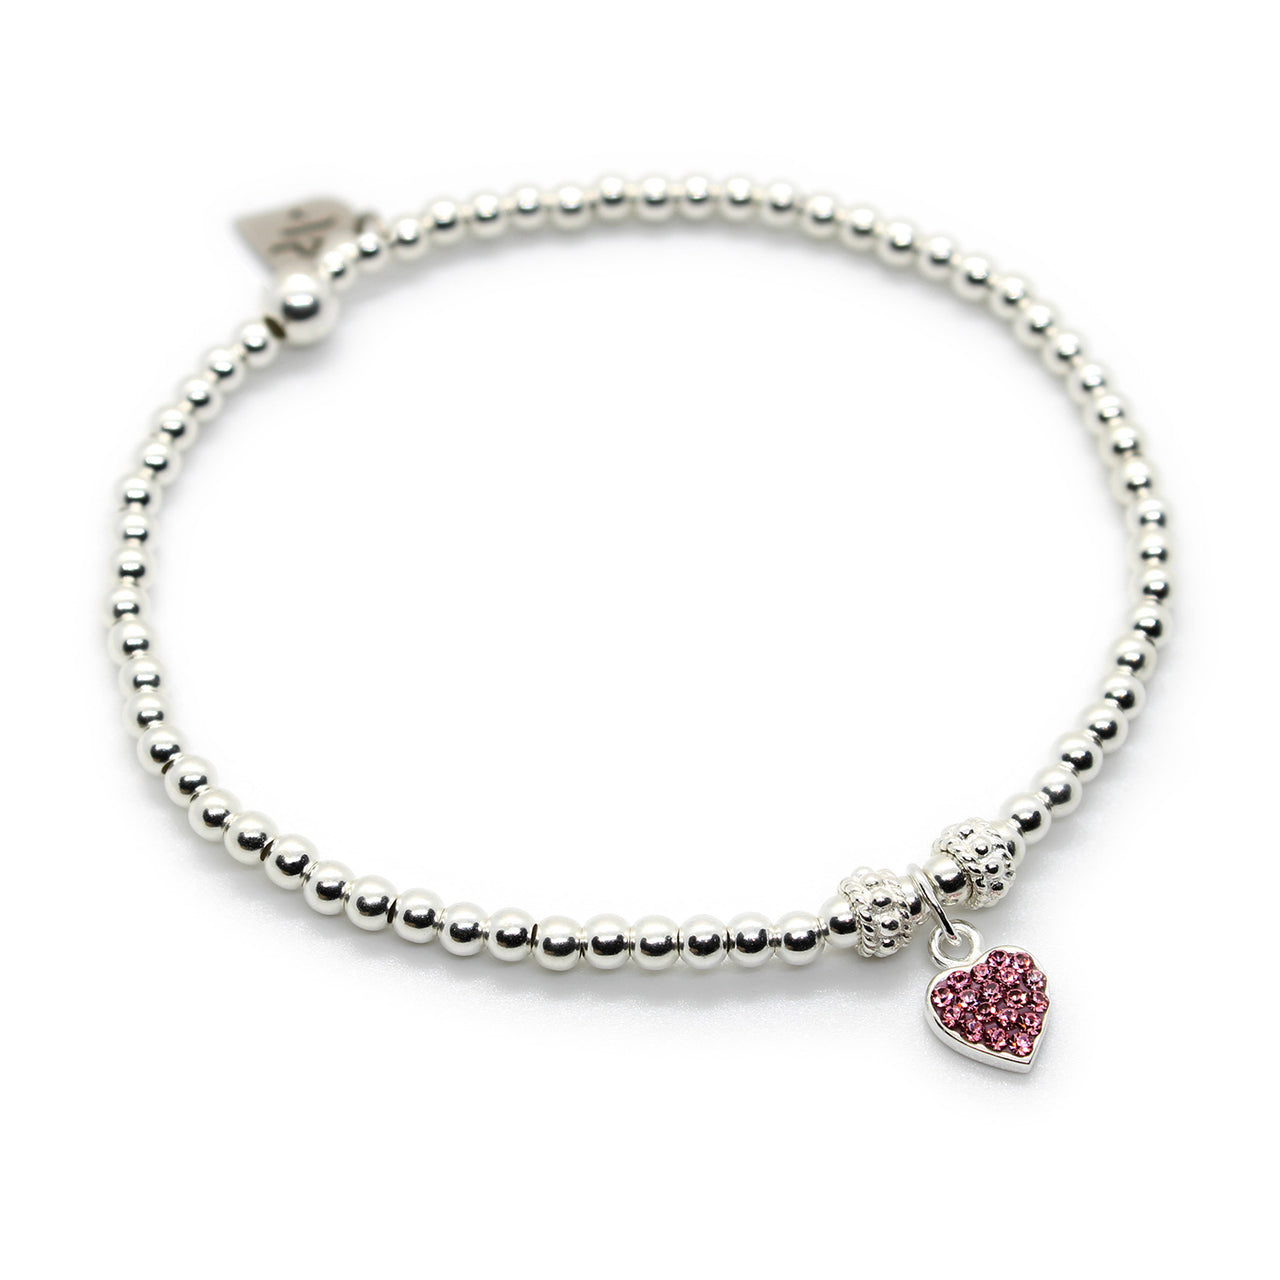 Sterling Silver Beaded Bracelet with Sparkly Pink Stone Heart